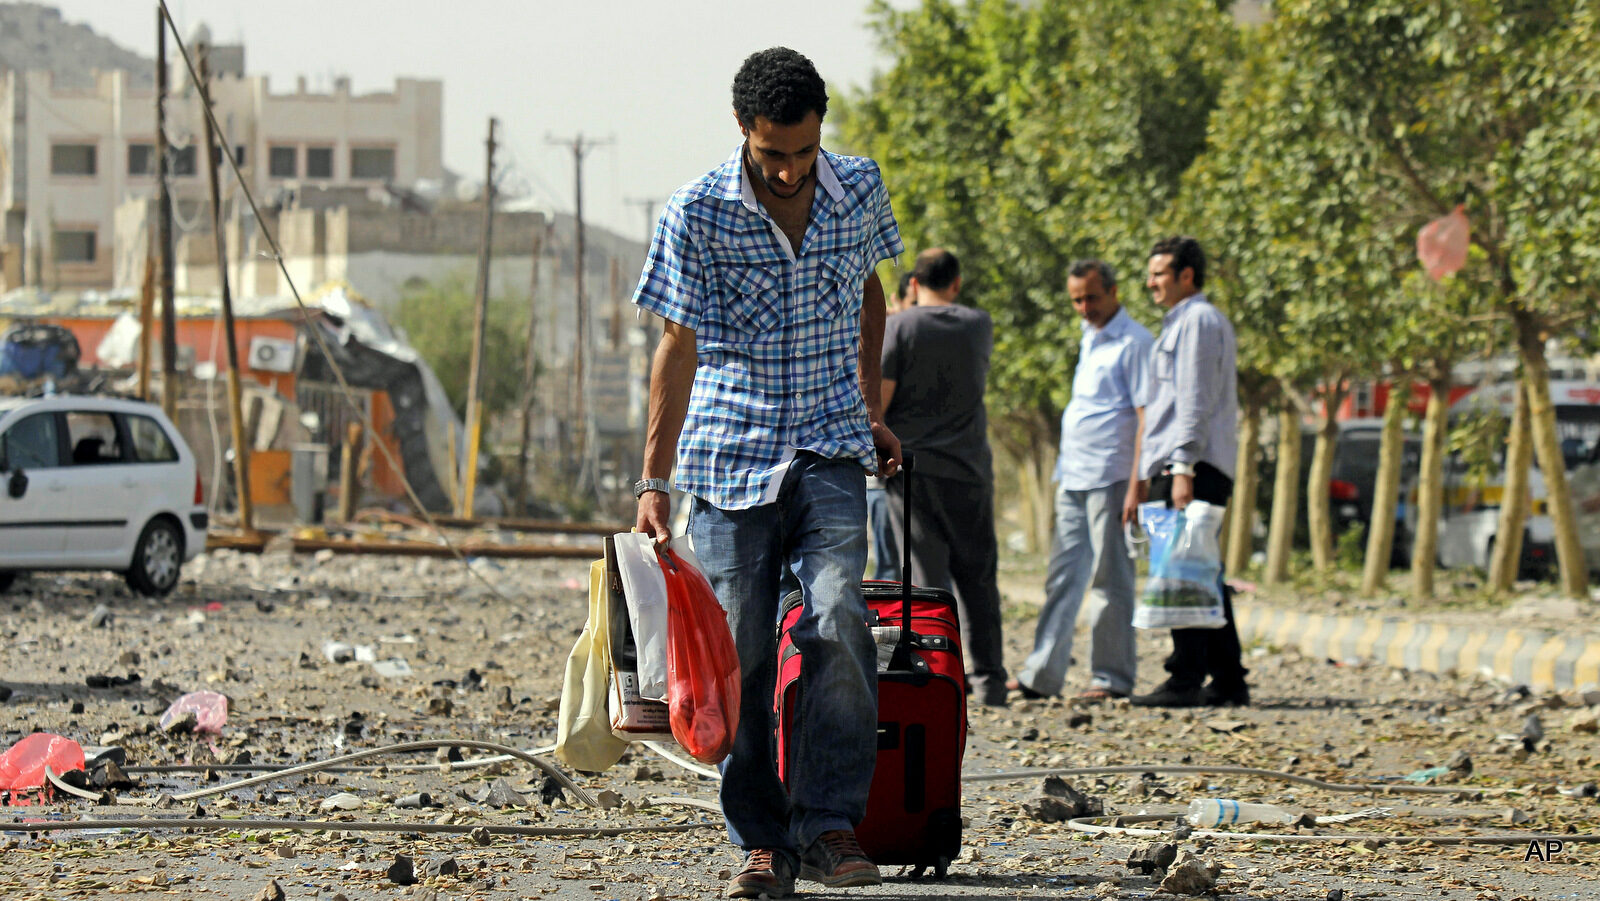 A man carries his belongings on a street littered with debris as he flees from his home after a Saudi-led airstrike against the Houthis, that hit a site of an alleged weapons cache in Yemen's capital, Monday, April 20, 2015. Saudi-led airstrikes caused massive explosions that shattered windows, sent residents scrambling for shelter and killed a local TV presenter.